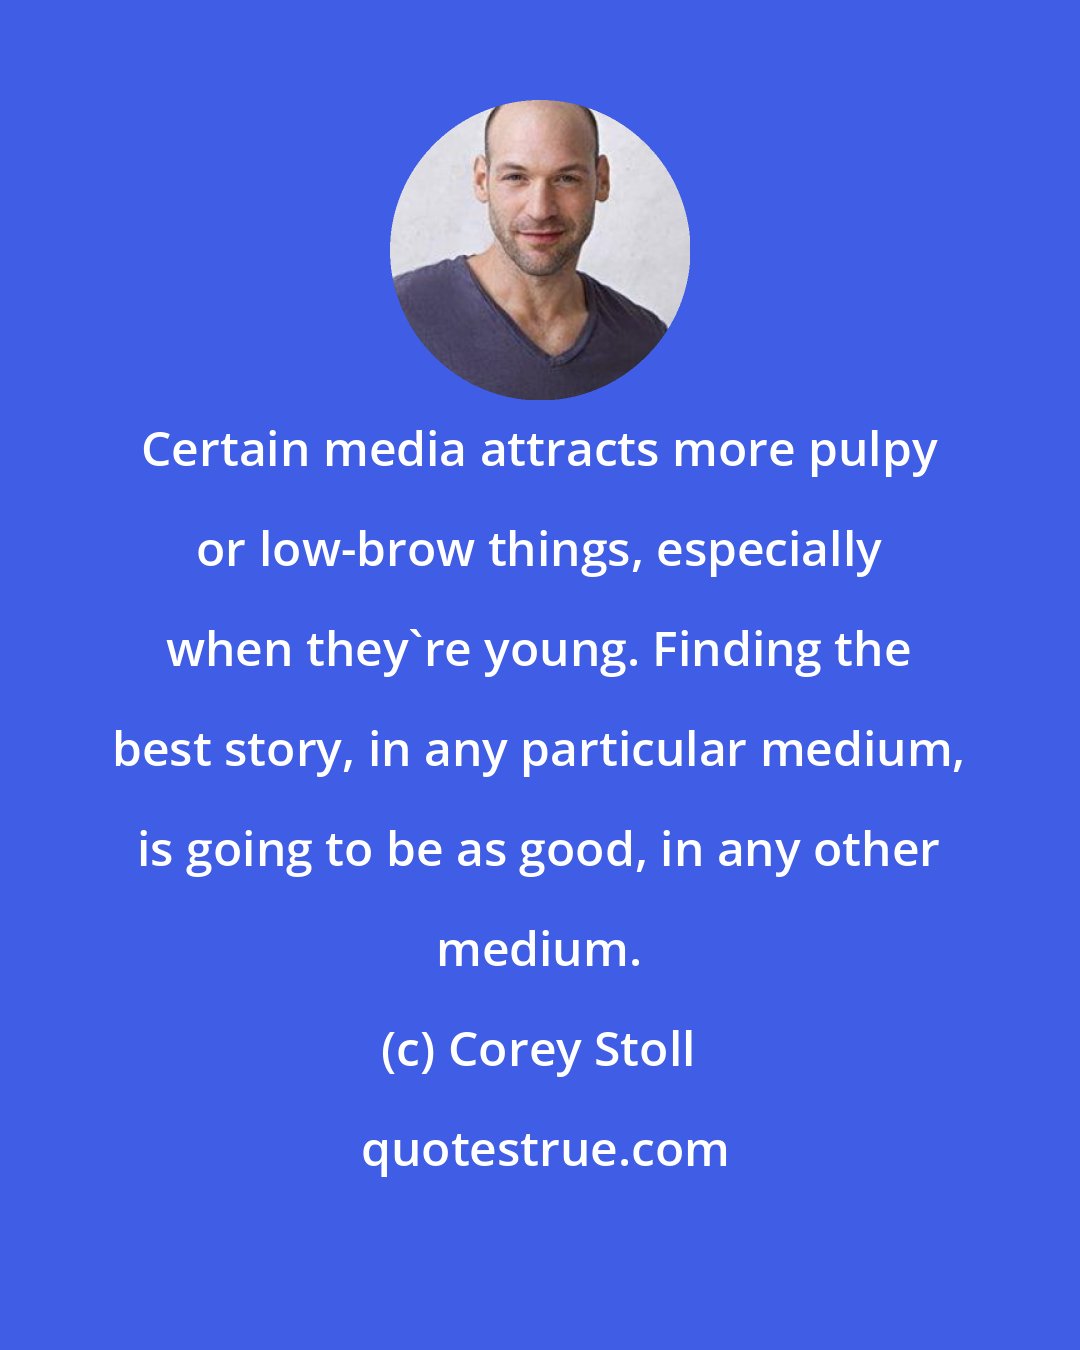 Corey Stoll: Certain media attracts more pulpy or low-brow things, especially when they're young. Finding the best story, in any particular medium, is going to be as good, in any other medium.